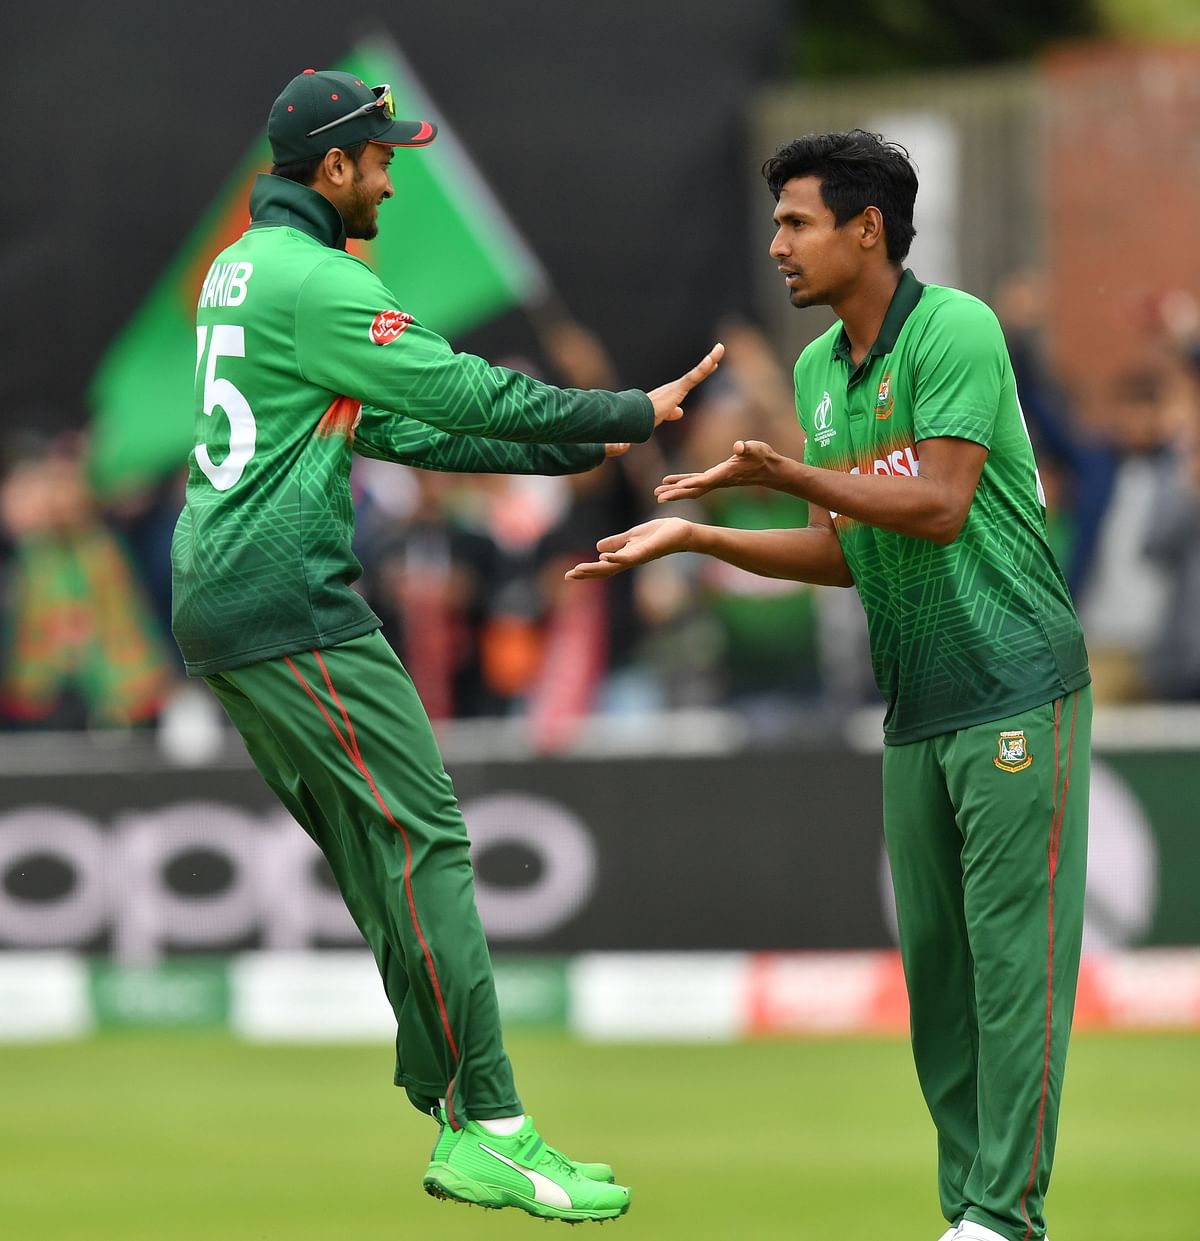 Bangladesh`s Mustafizur Rahman (R) celebrates with Bangladesh`s Shakib Al Hasan after taking the wicket of West Indies` Andre Russell during the 2019 Cricket World Cup group stage match between West Indies and Bangladesh at The County Ground in Taunton, southwest England, on 17 June 2019.